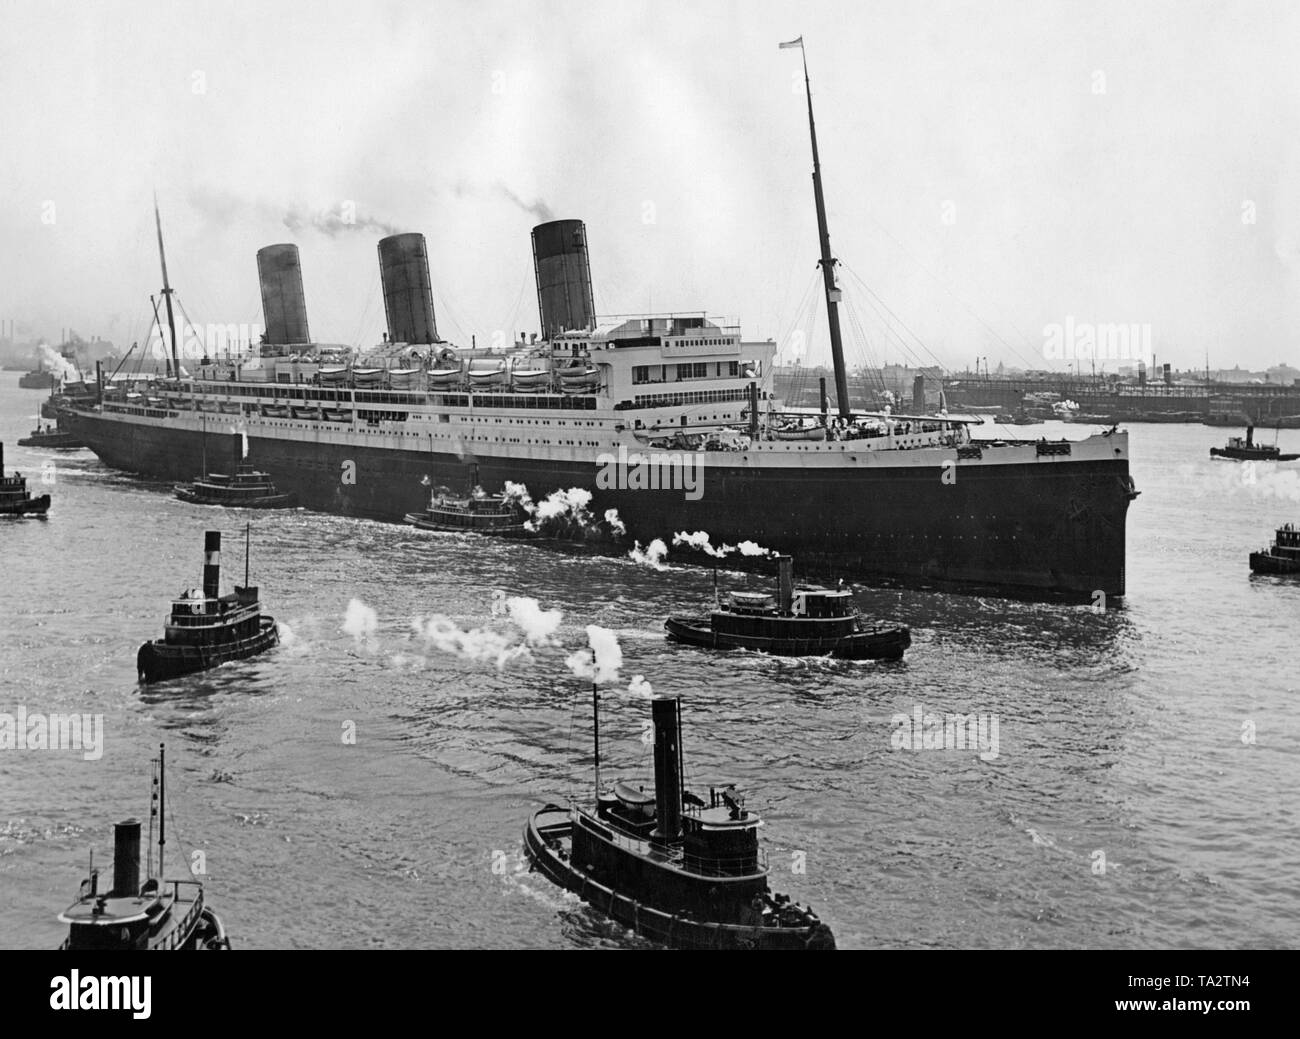 The 'Majestic' of the shipping company White Star Line was the largest ship in the world at the time of her commissioning. She served the North Atlantic route between Southampton and New York. Stock Photo